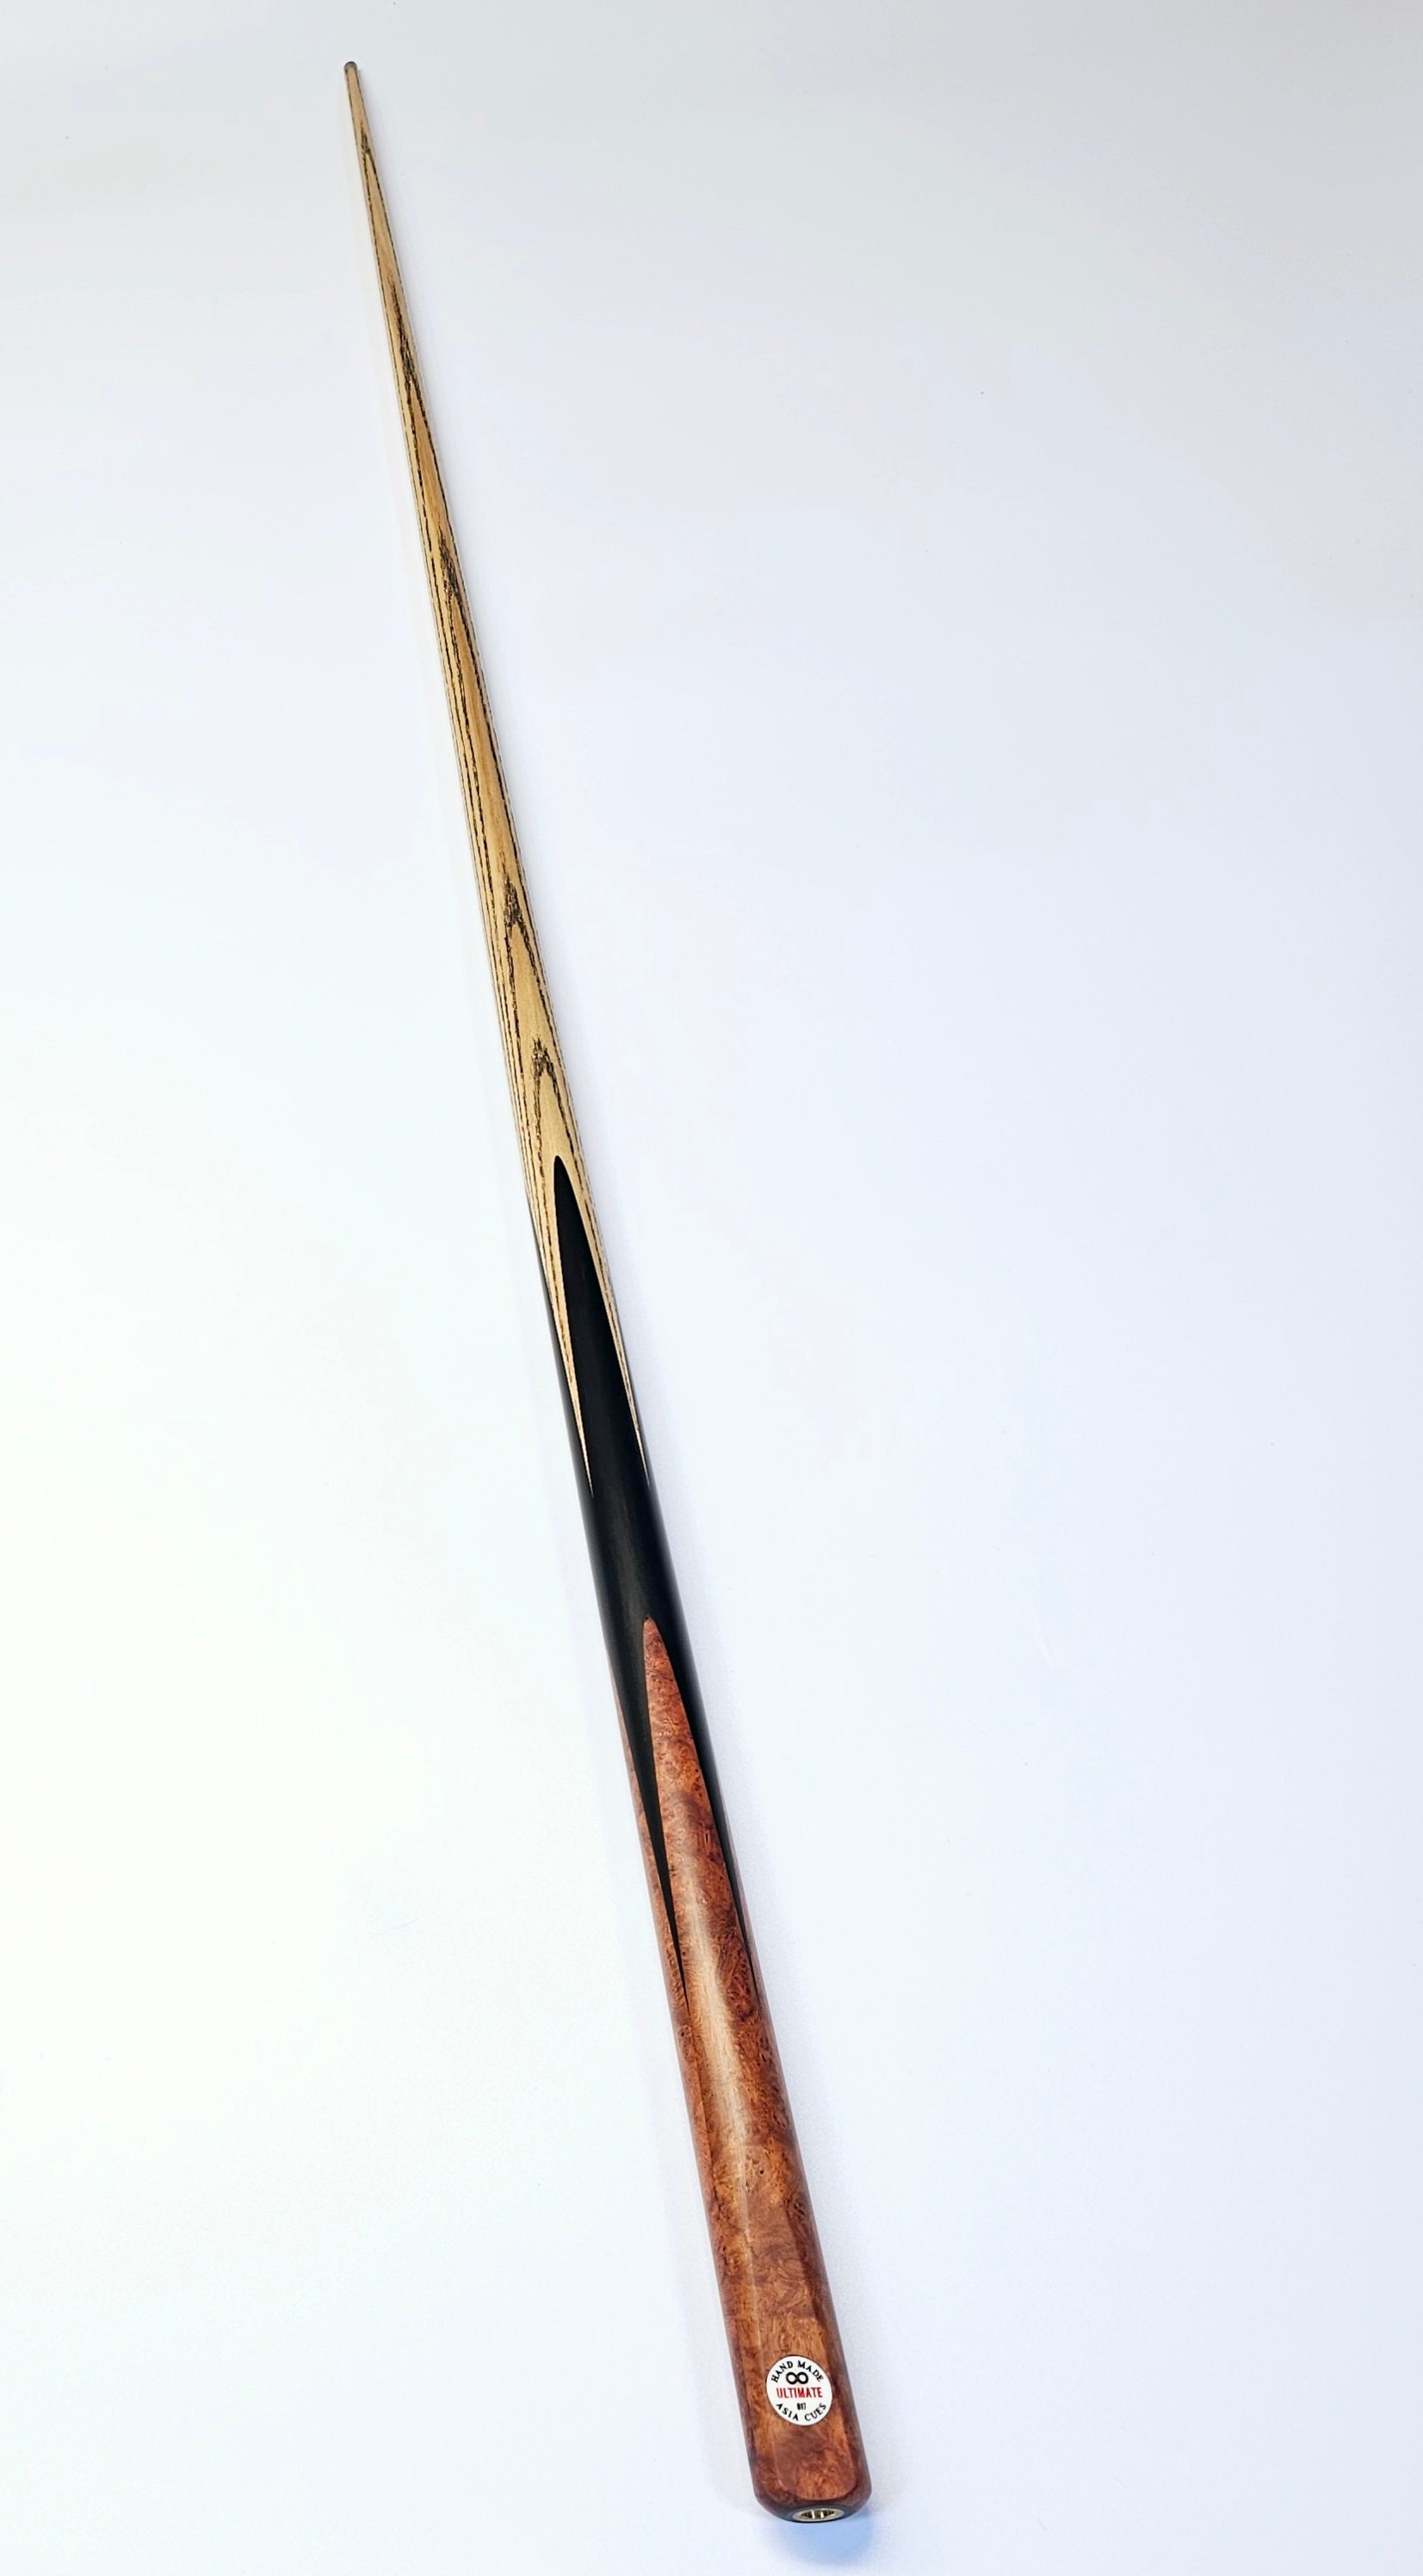 Asia Cues Ultimate No.817  - One Piece Snooker Cue 9.5mm Tip, 18.1oz, 57.5"